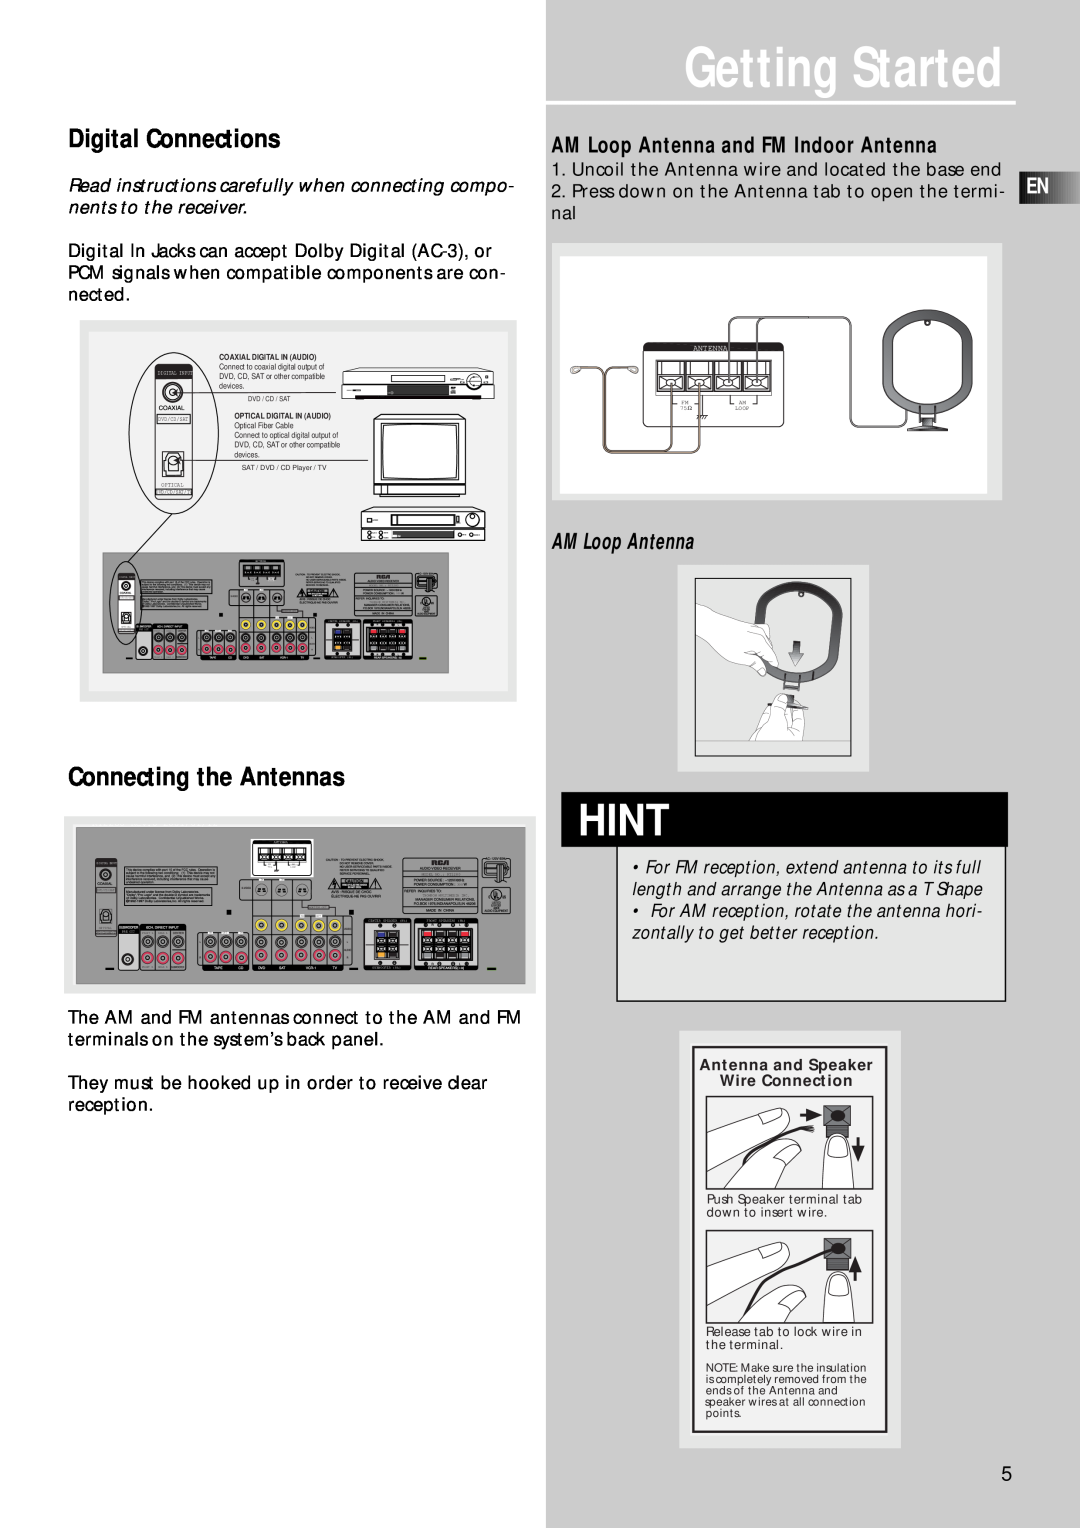 RCA RT2280 Hint, Digital Connections, Connecting the Antennas, AM Loop Antenna and FM Indoor Antenna, Getting Started 